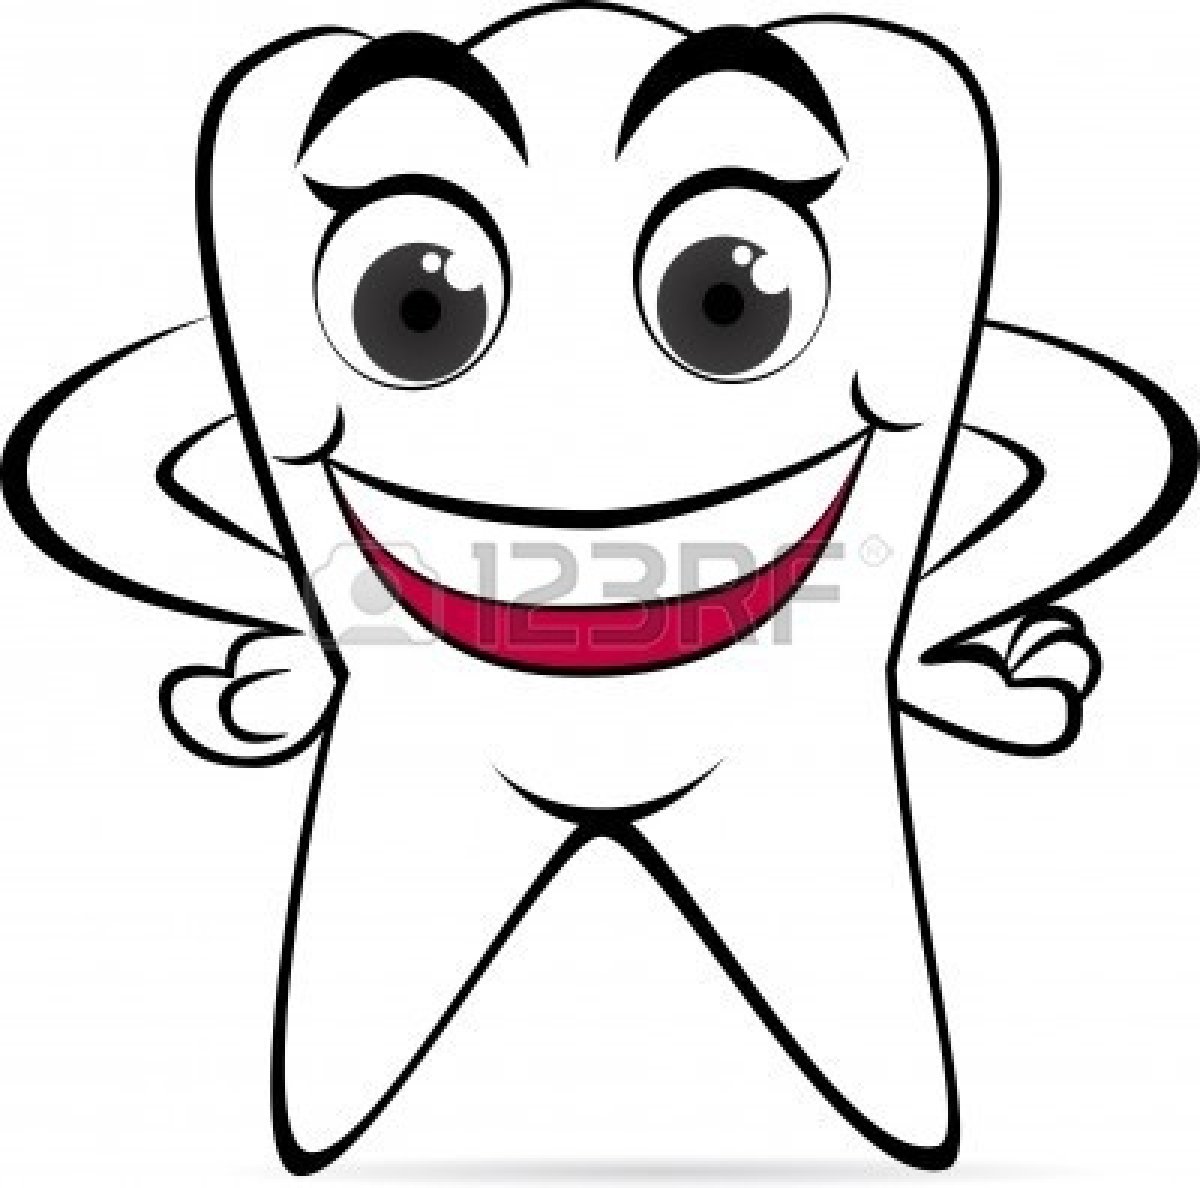 dental clipart happy tooth